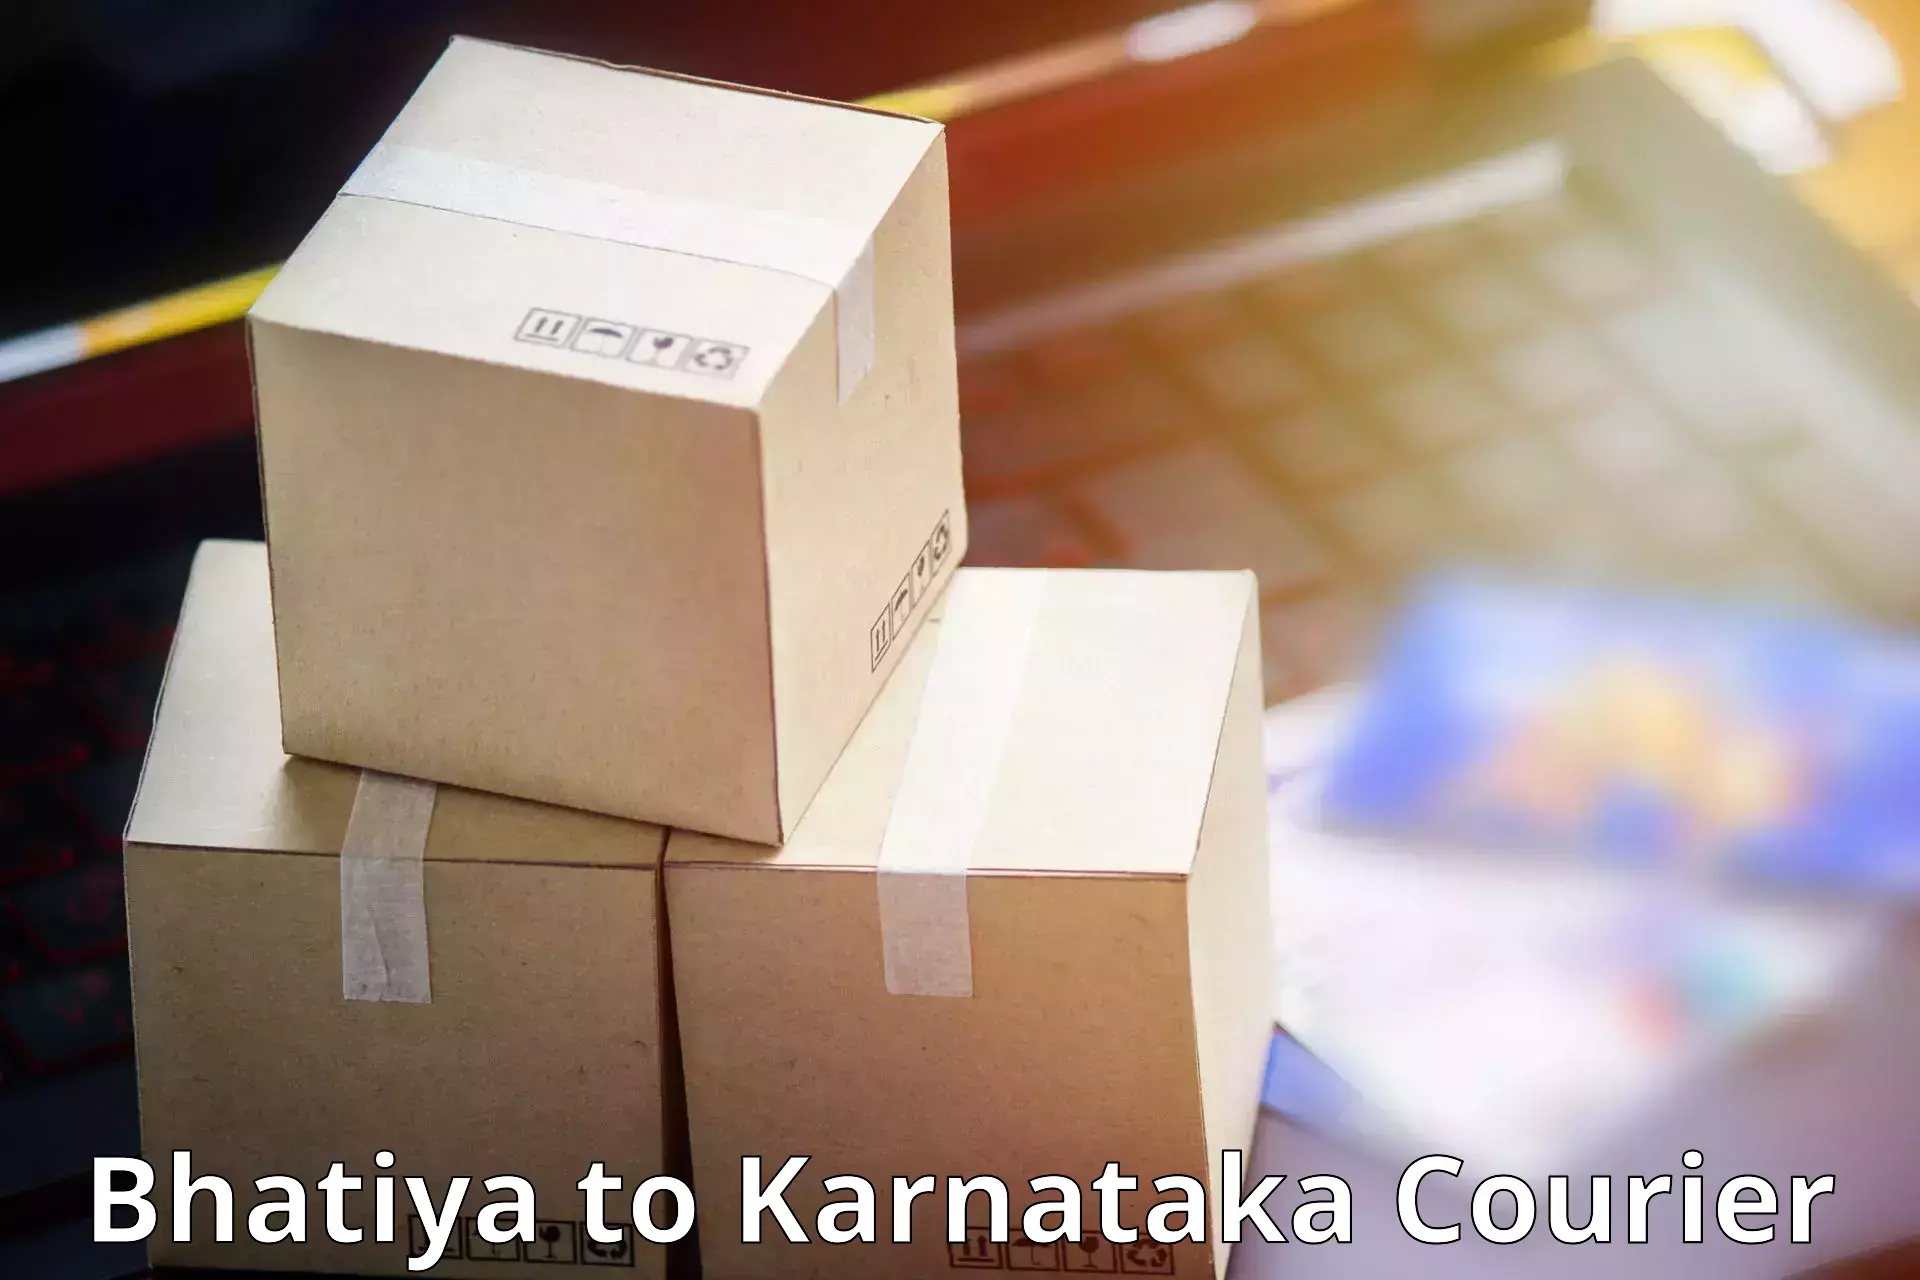 Quality courier services Bhatiya to Hungund